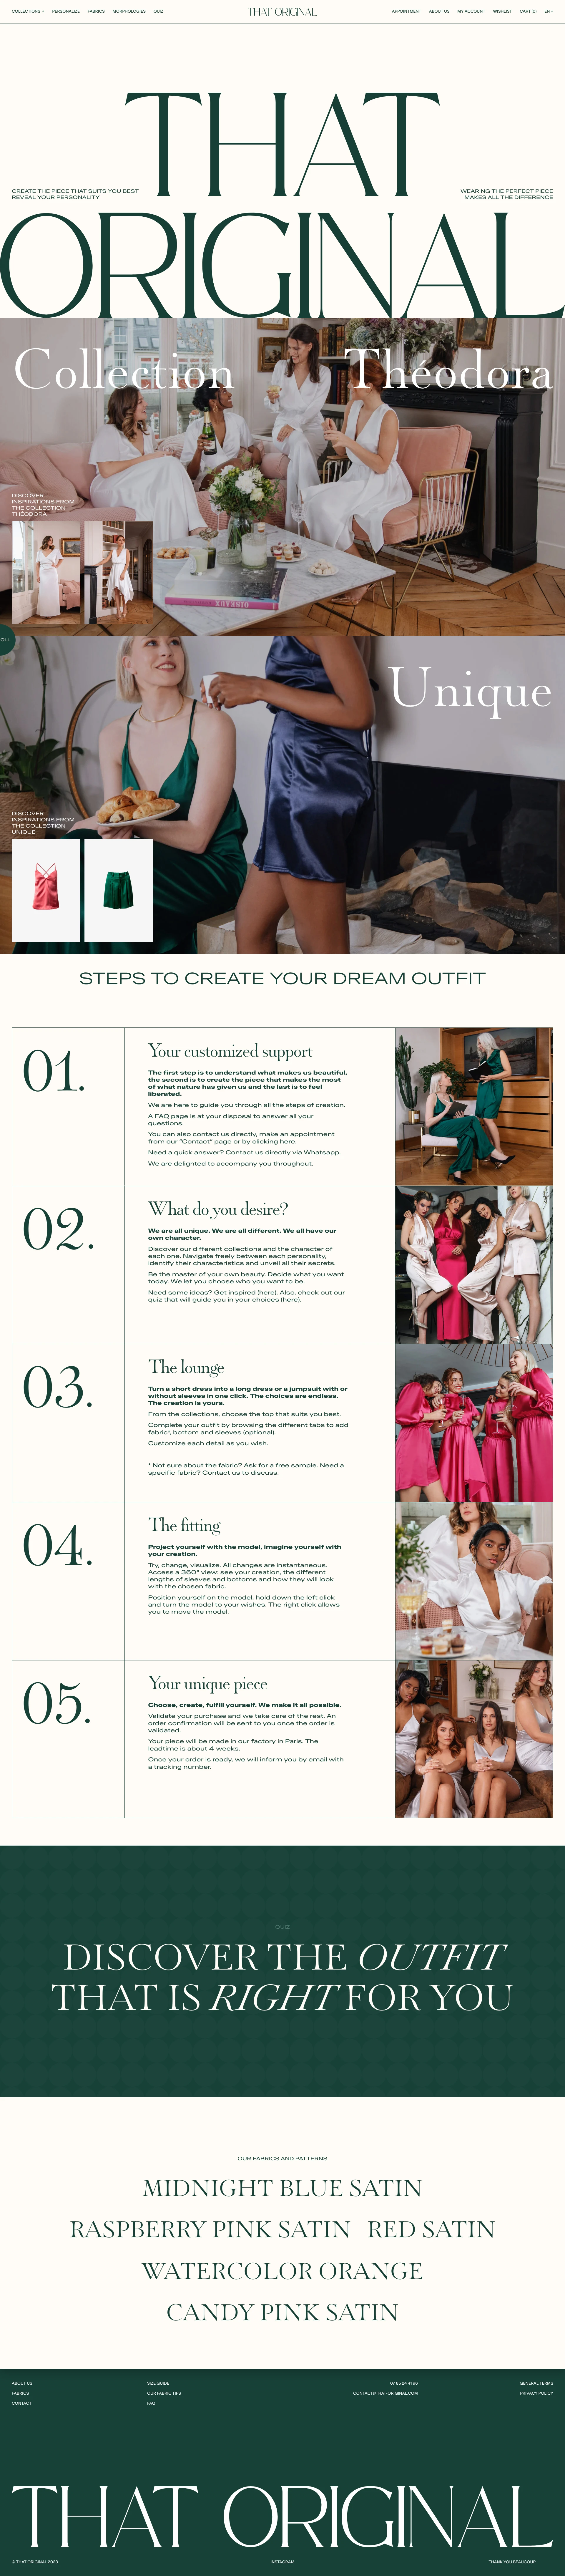 That Original Landing Page Example: Custom made clothing for women - Dresses / Jumpsuits for galas / parties / wedding. Bridesmaids' outfits.